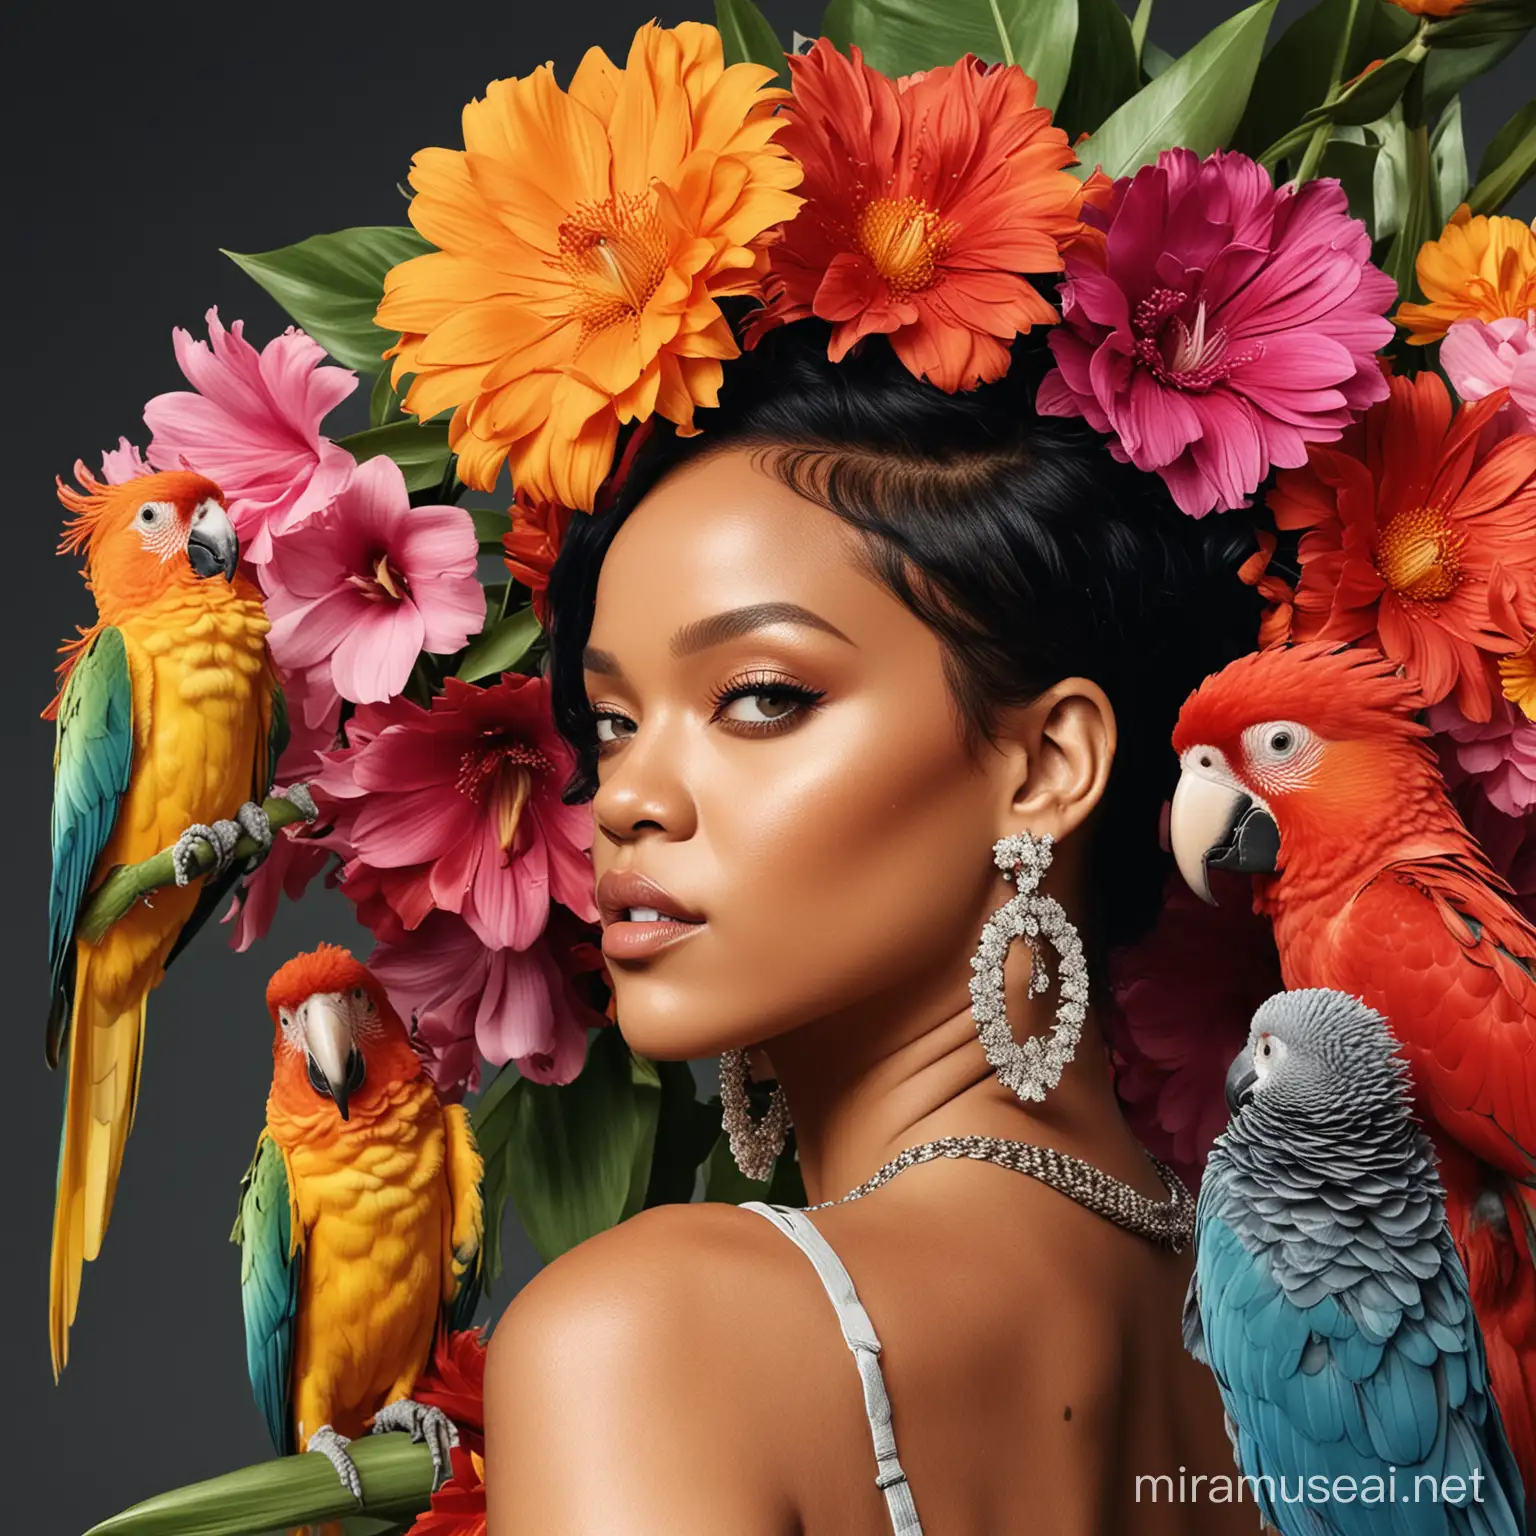 Rihanna's face from the side, from behind on the left side you can see very large colored parrots, and on the right some giant flowers